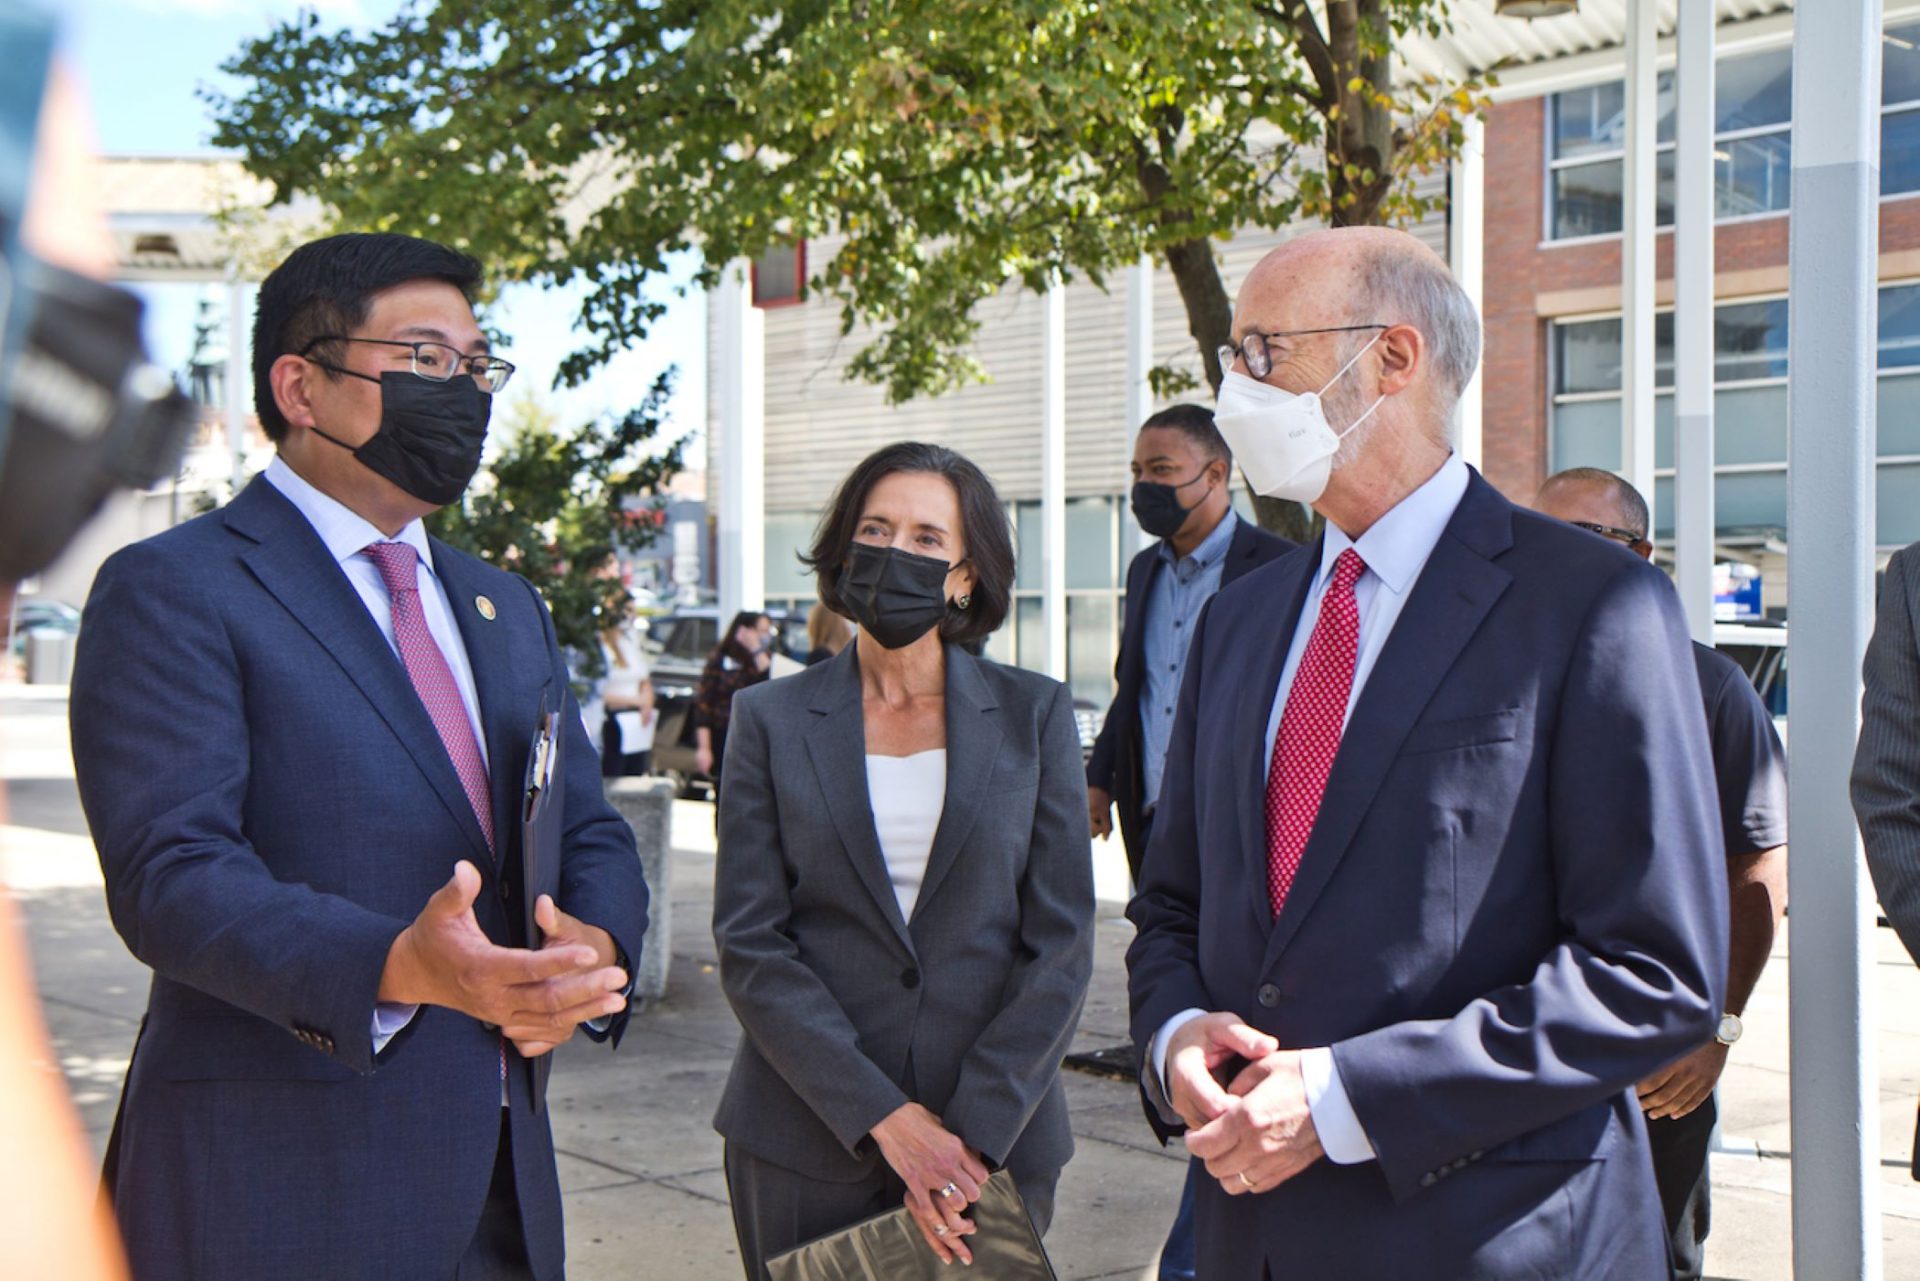 Pennsylvania Governor Tom Wolf (right) talked to Dr. Valarie Arkoosh and Dr. Alvin Wang at Norristown Transportation Center on September 29, 2021.